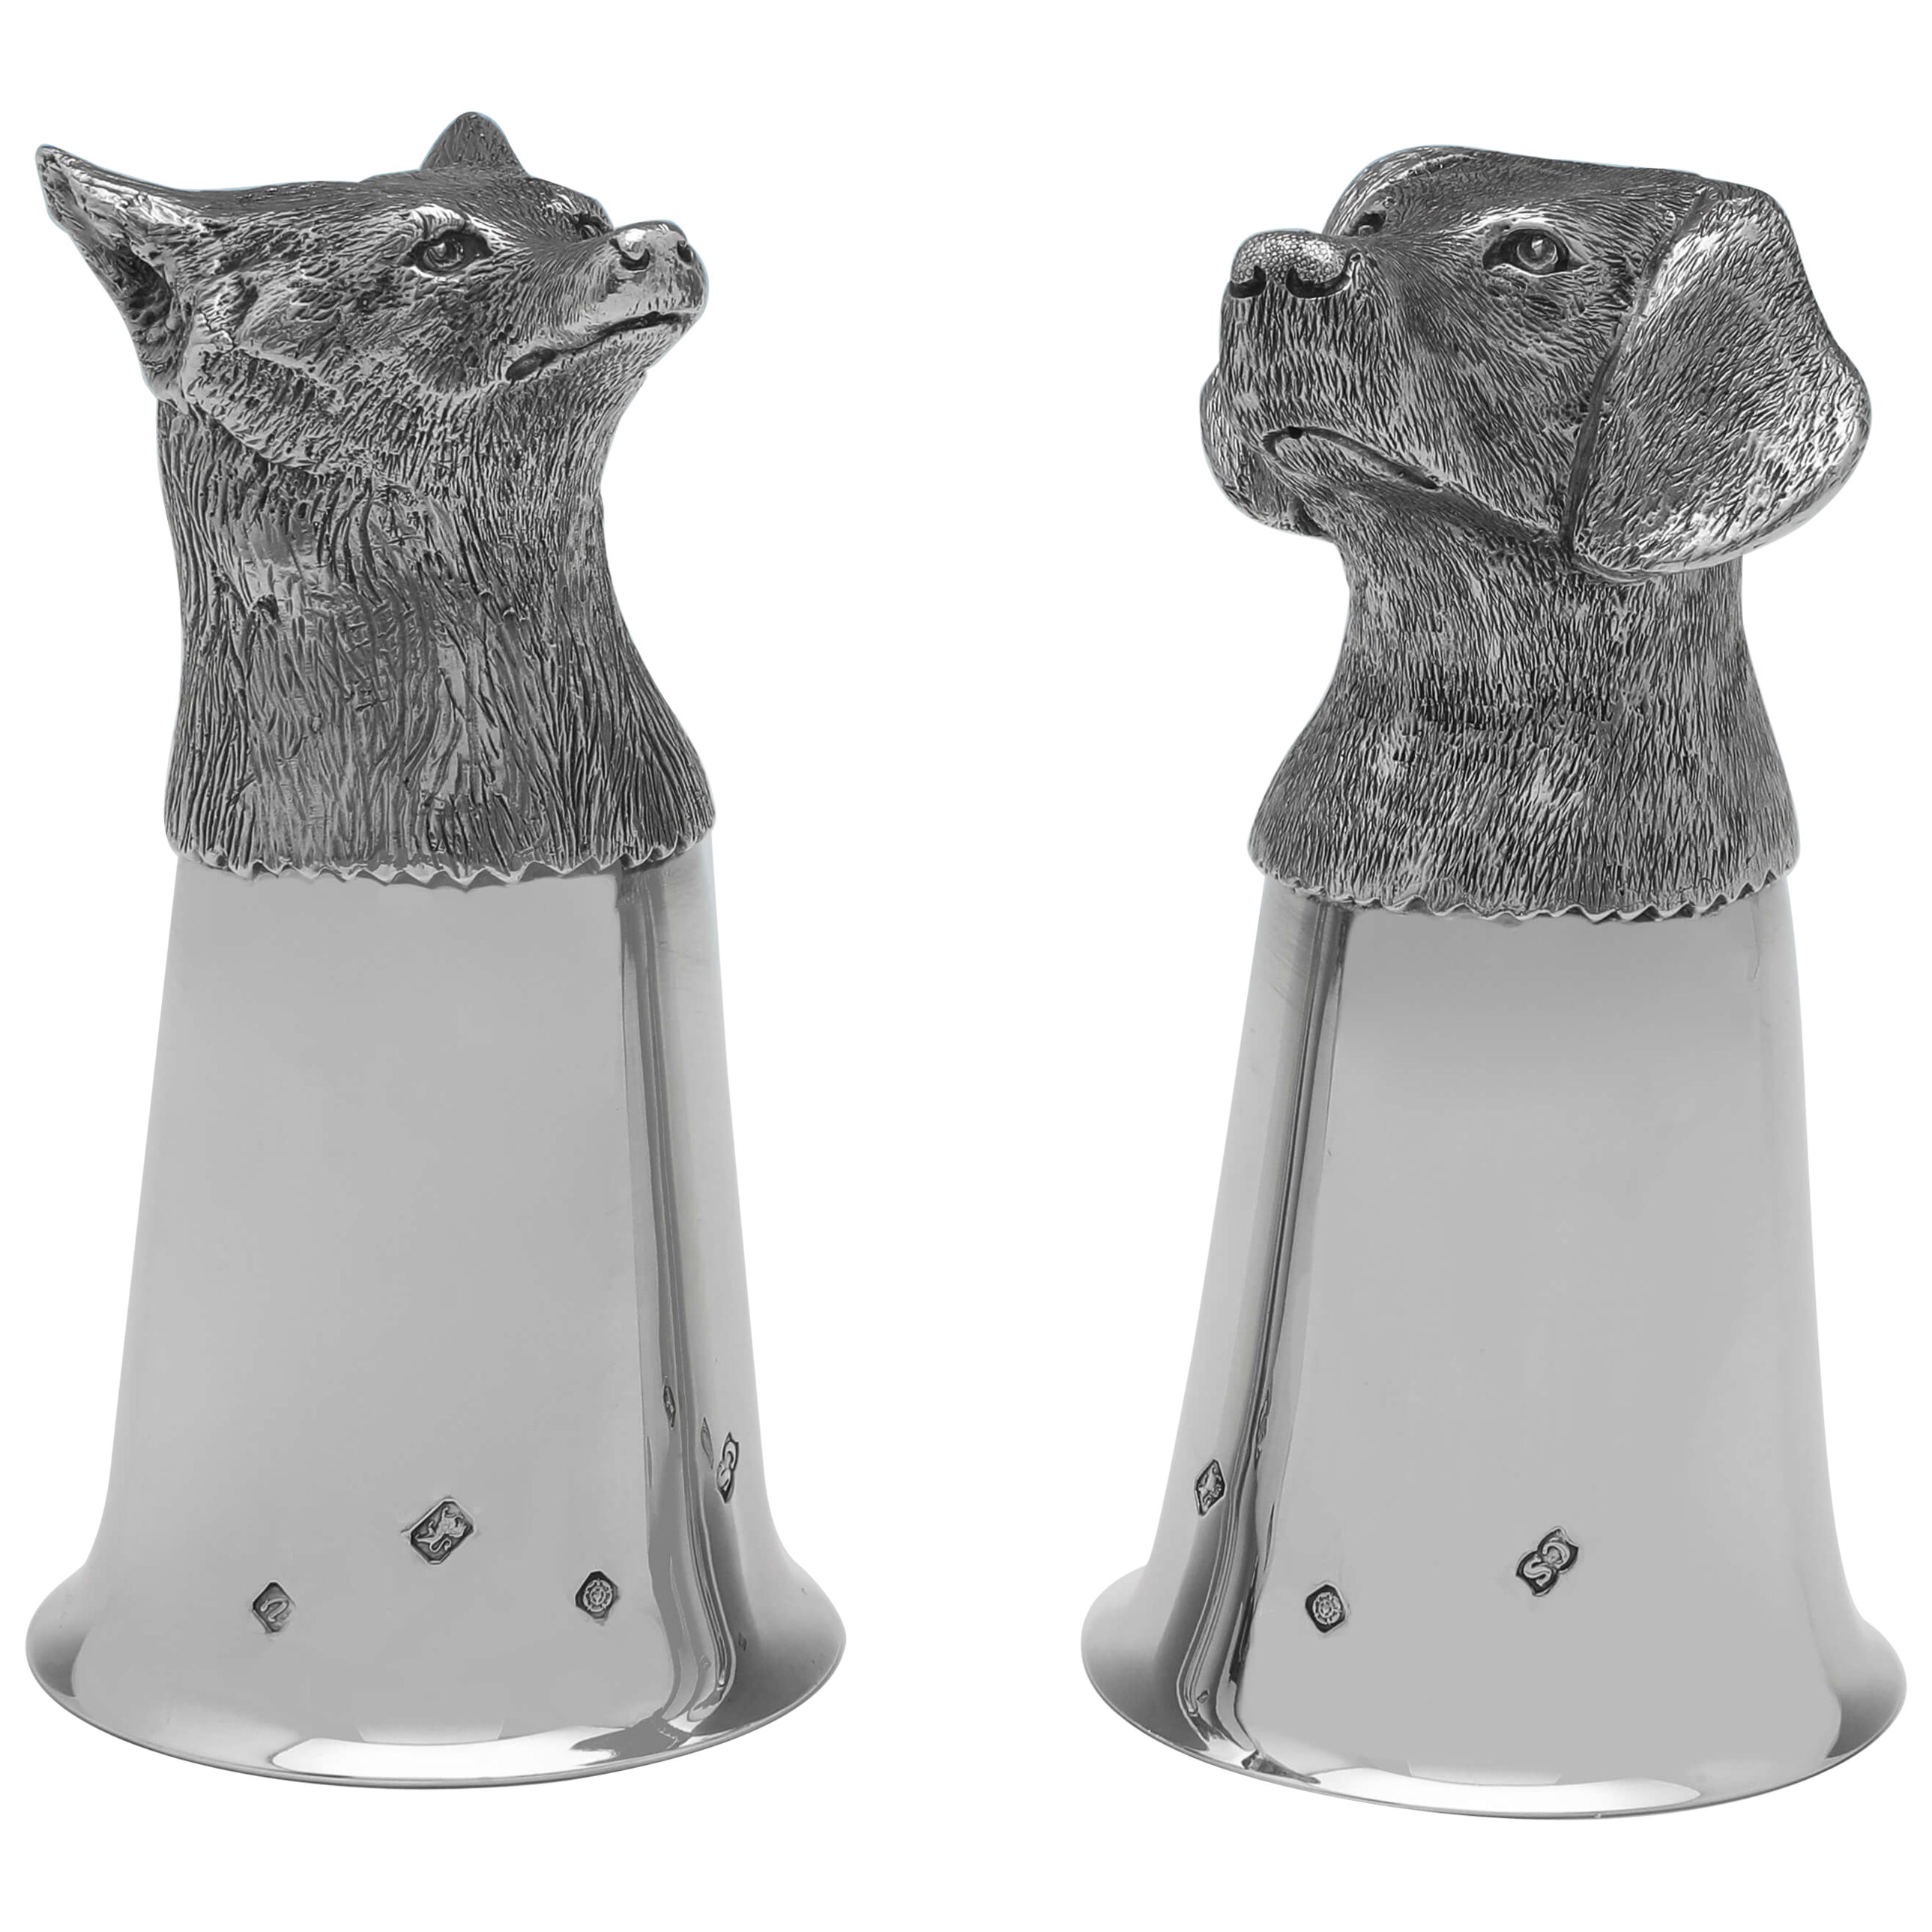 Pair of Sterling Silver Stirrup Cups - Fox & Dog Head - Camelot Silverware 1995 For Sale